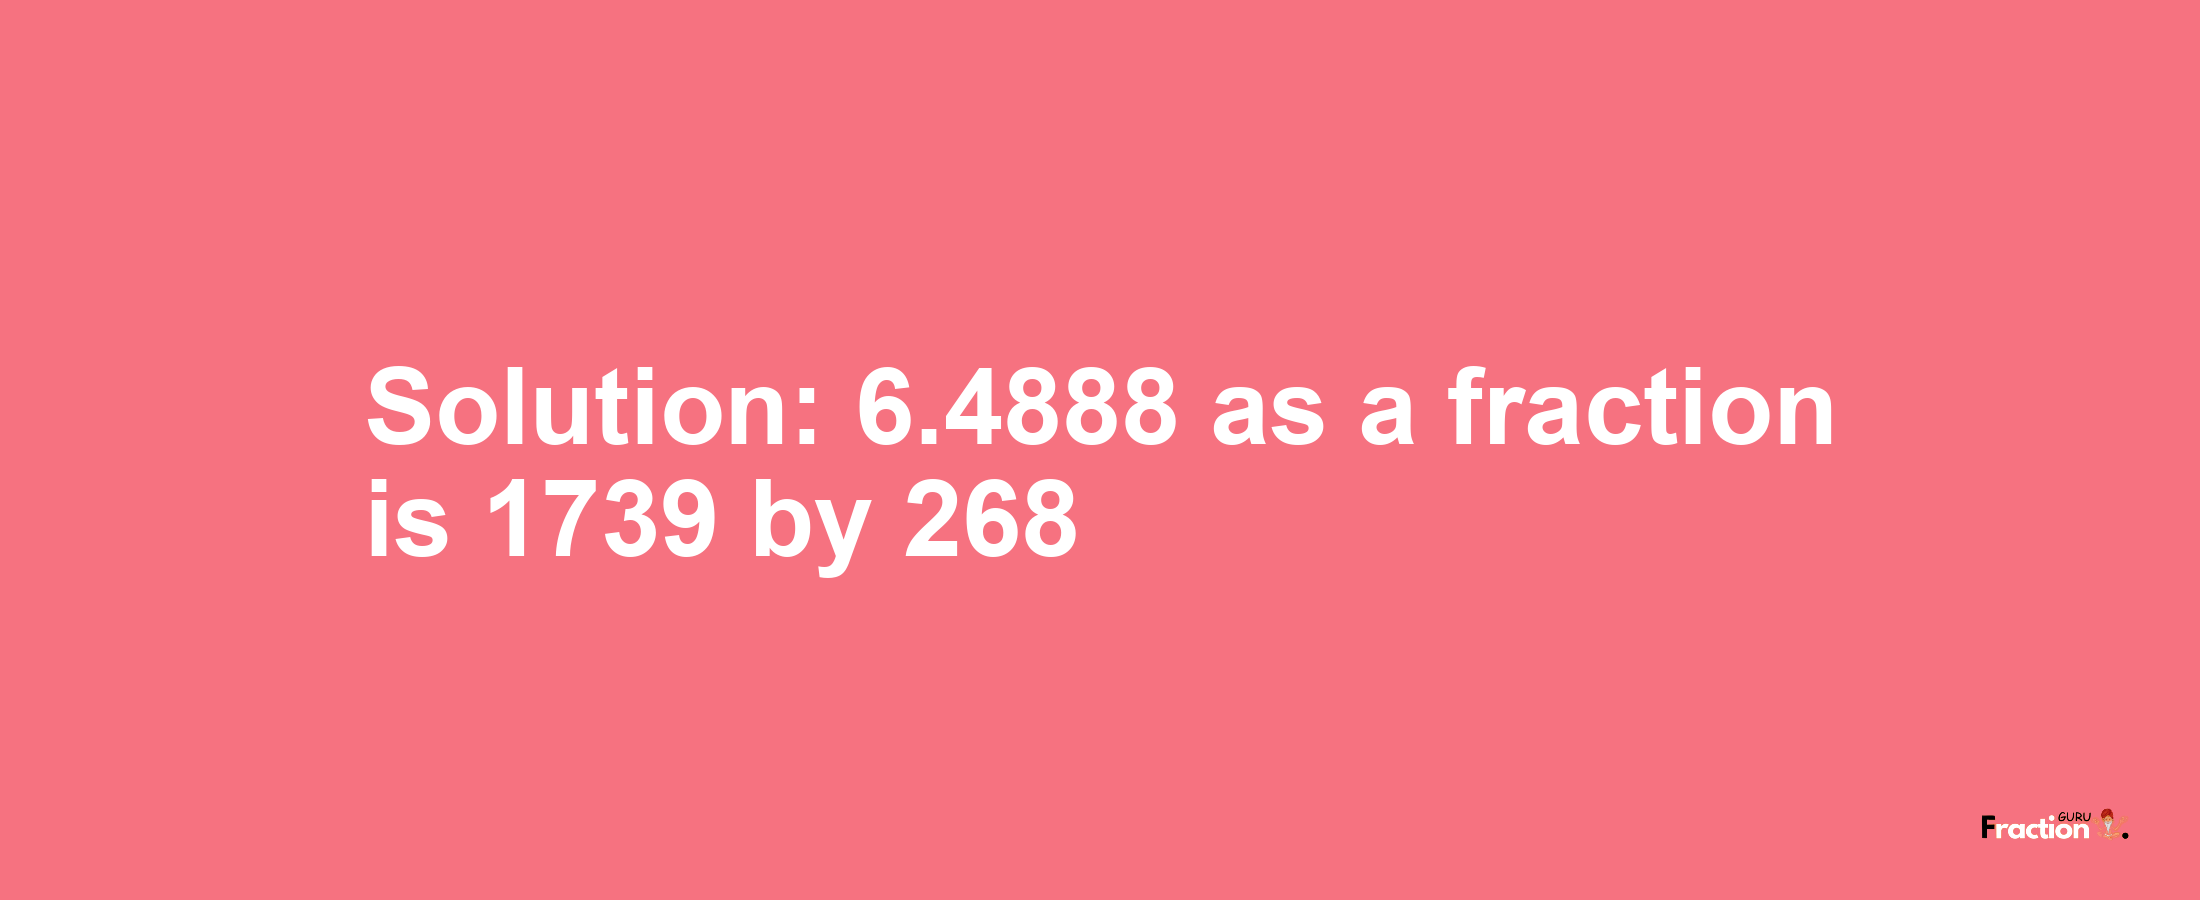 Solution:6.4888 as a fraction is 1739/268